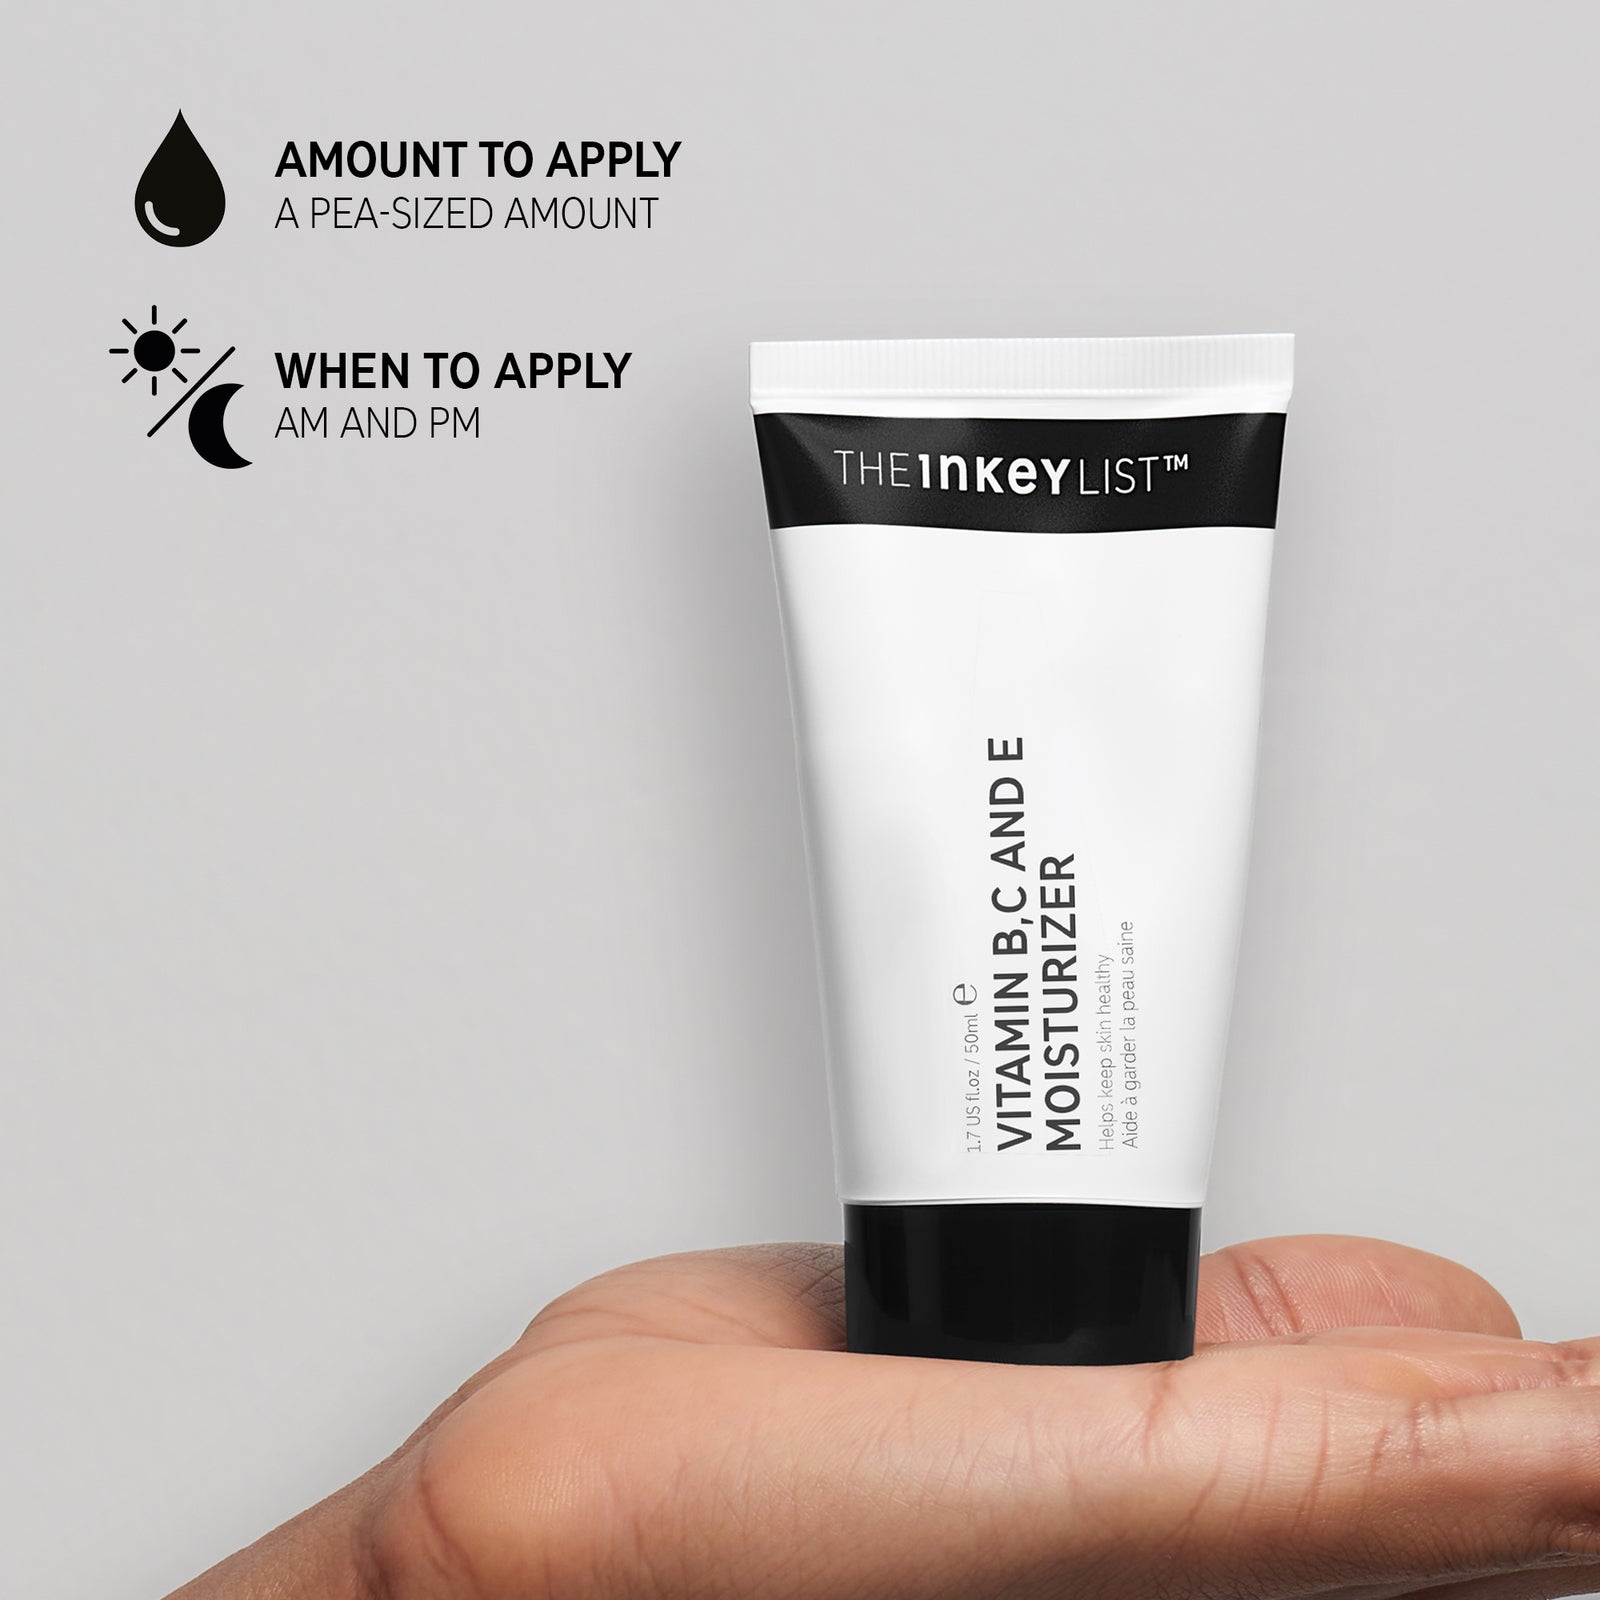 Hand holding Vitamin B, C and E Moisturizer with text: Amount to apply (pea-szied amount) and when to use it in your routine (AM and PM)